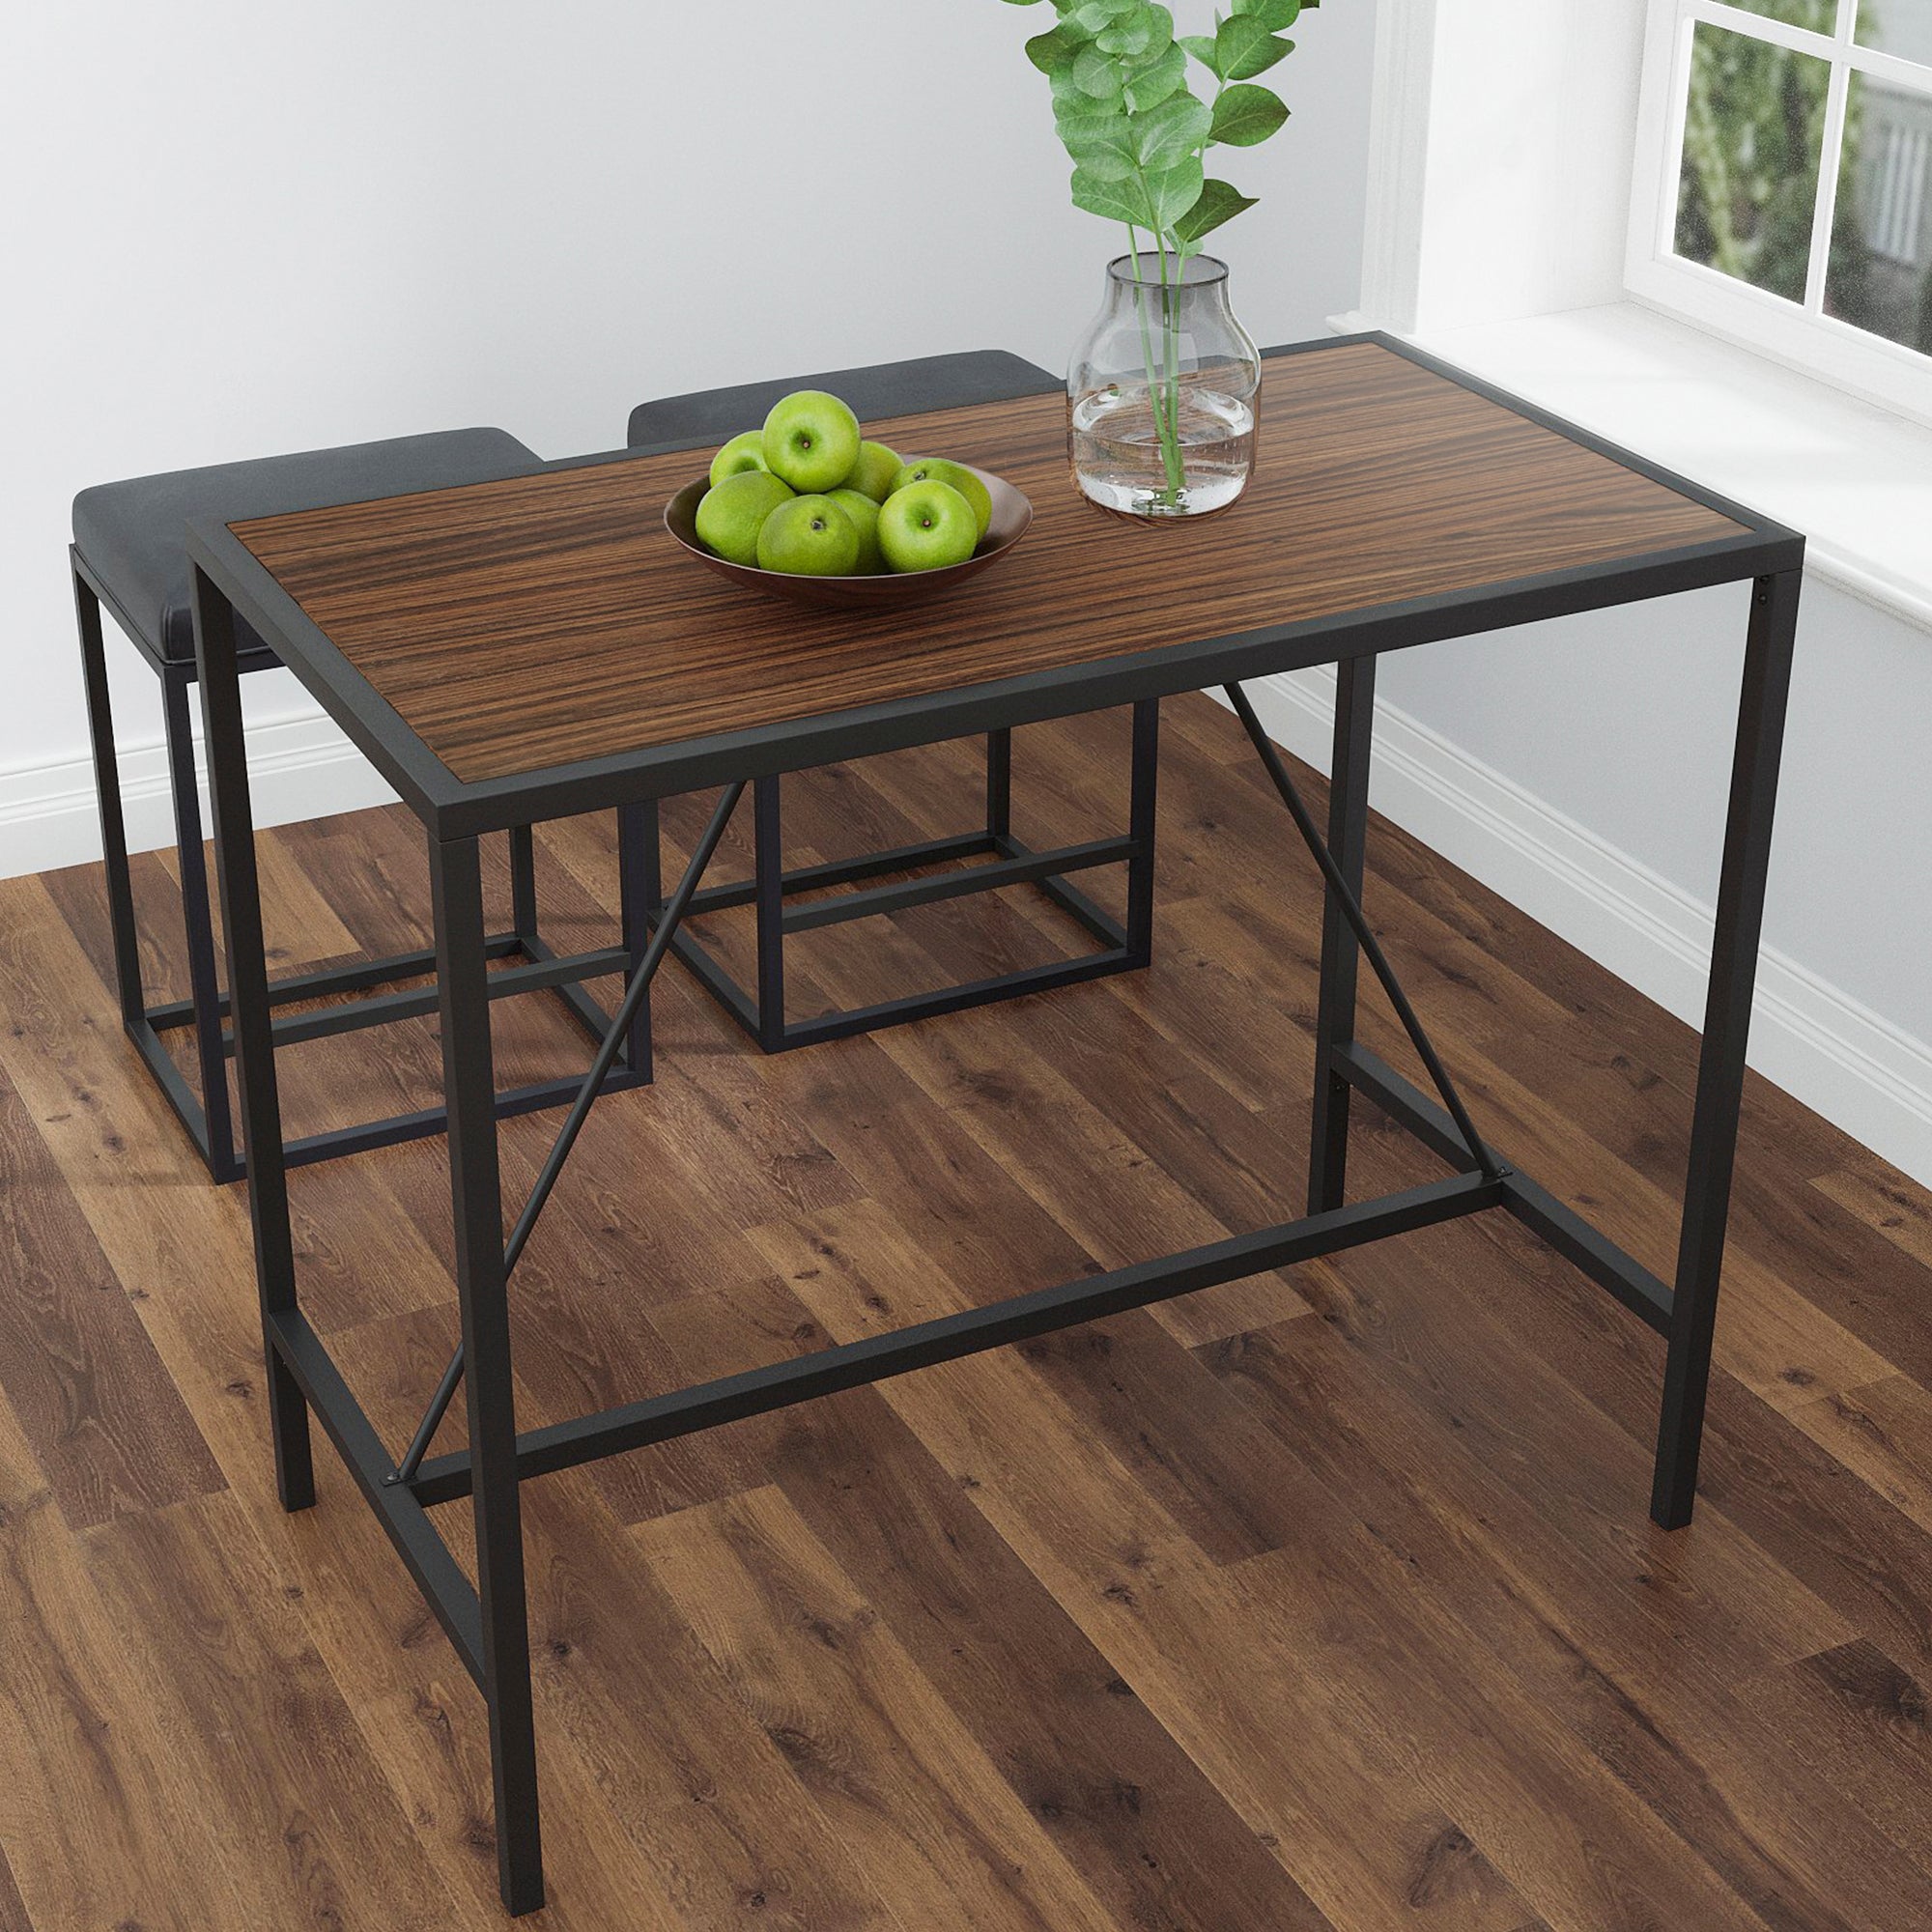 Riley-Indoor-Walnut-Metal-Pub-Dining-Table-with-Metal-Frame-Kitchen-&-Dining-Room-Tables